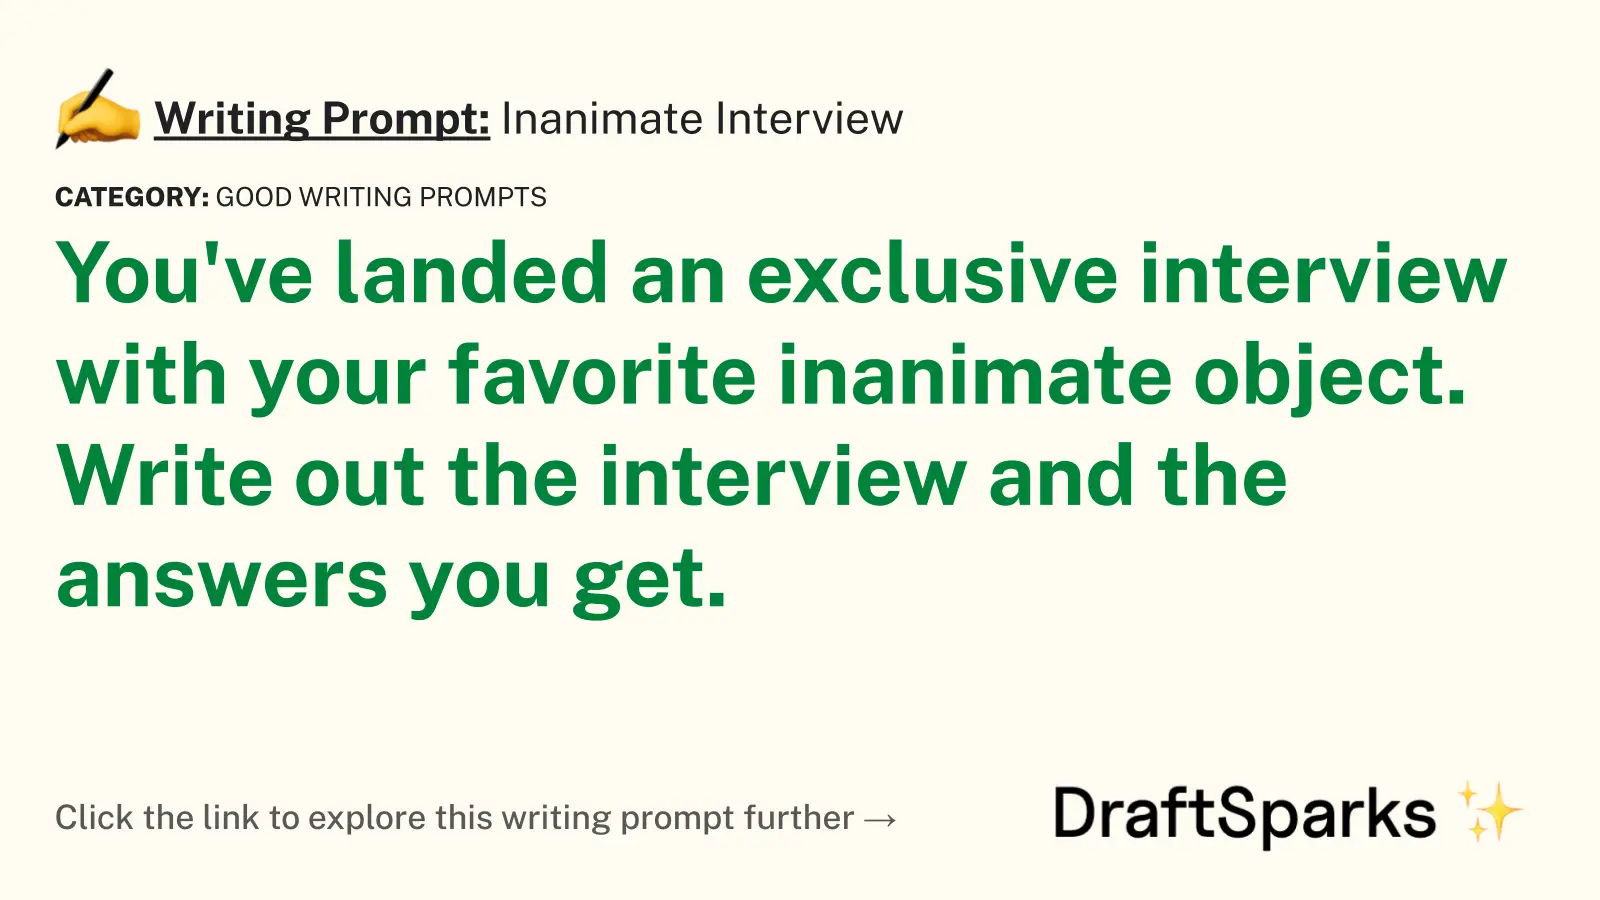 Inanimate Interview